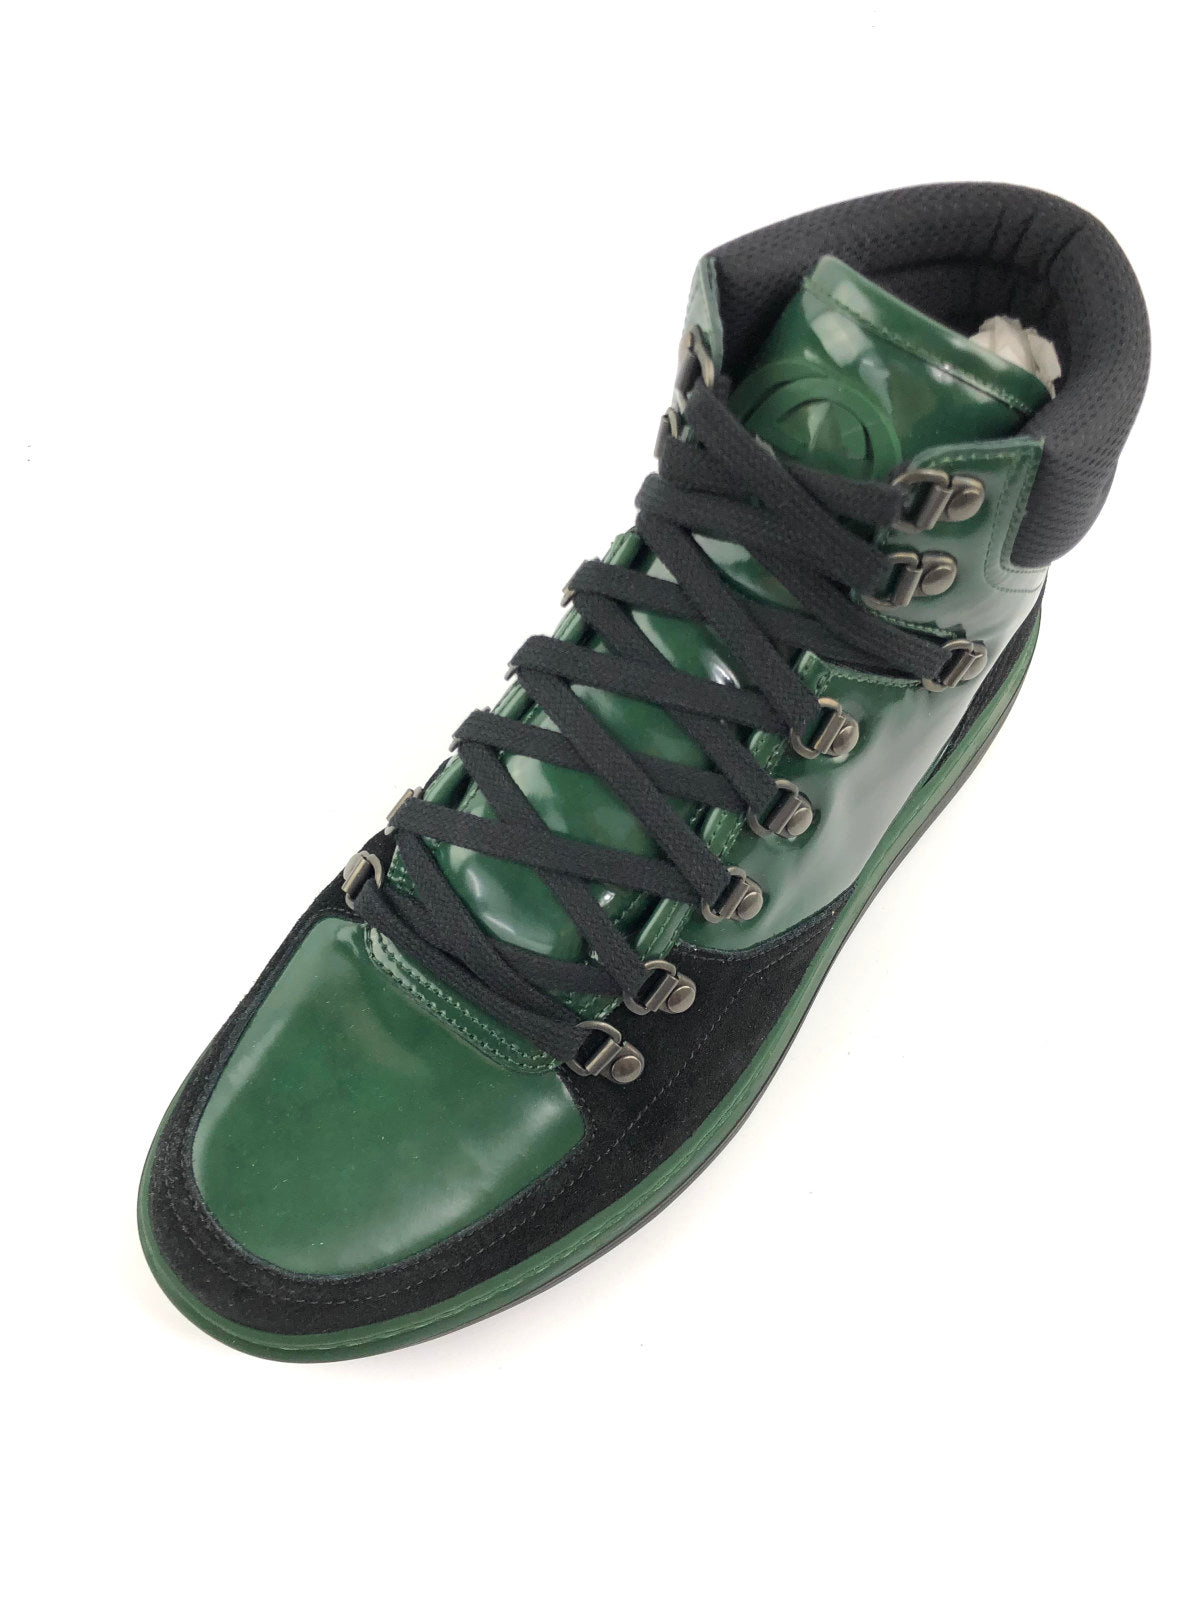 endnu engang kirurg Regelmæssigt GUCCI Dark Green Suede Contrast Combo MENS High Top Sneakers Size 8 - The  Purse Ladies